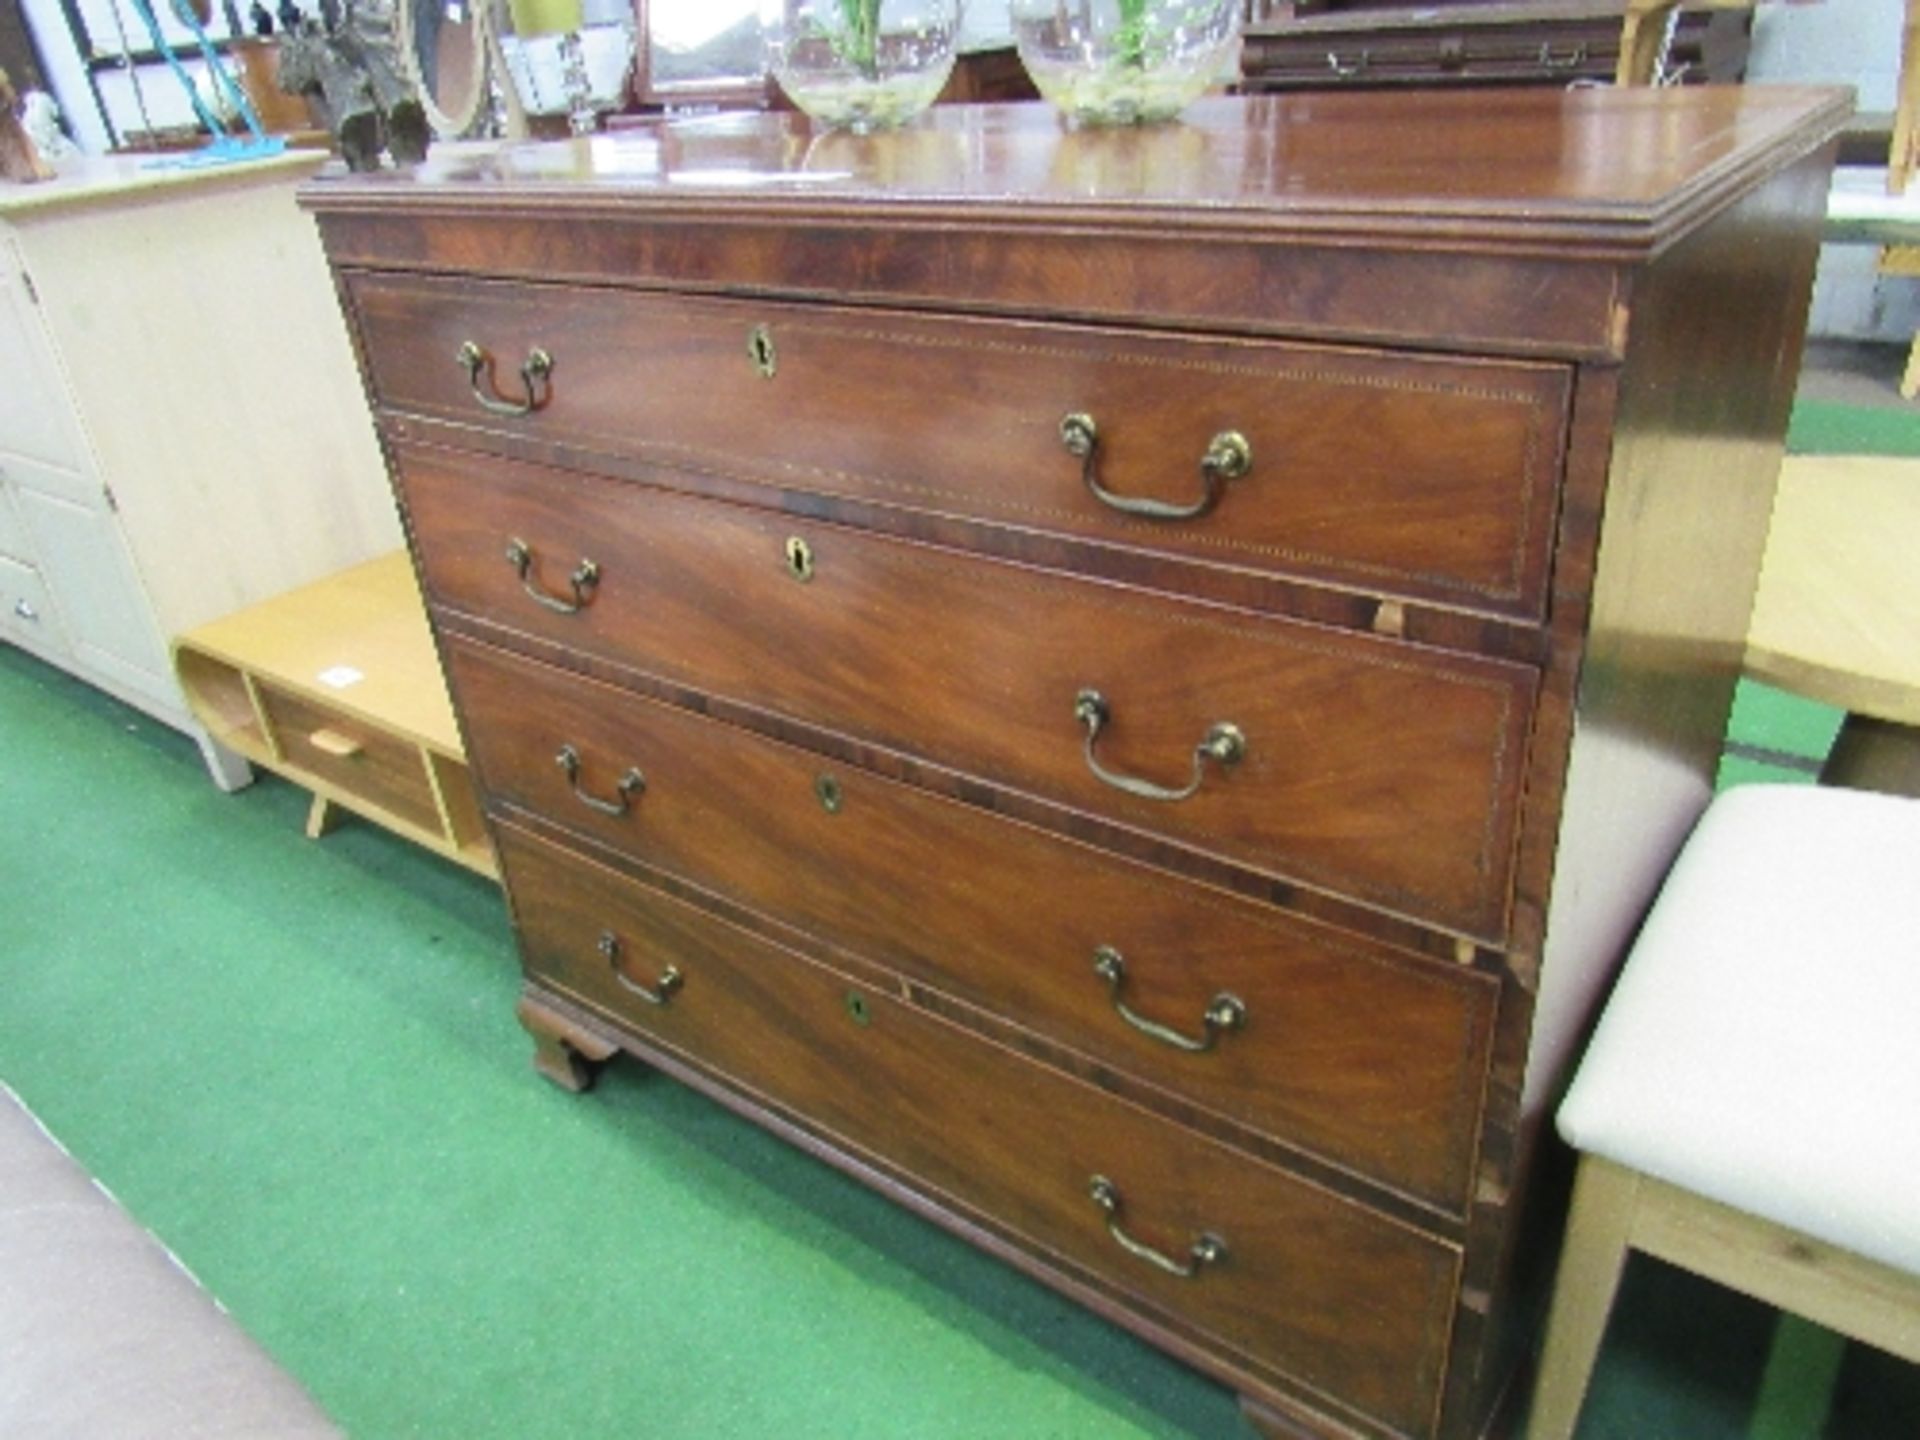 Victorian mahogany chest of 4 drawers with string inlay on bracket feet, 44" x 21" x 40" high - Image 3 of 4